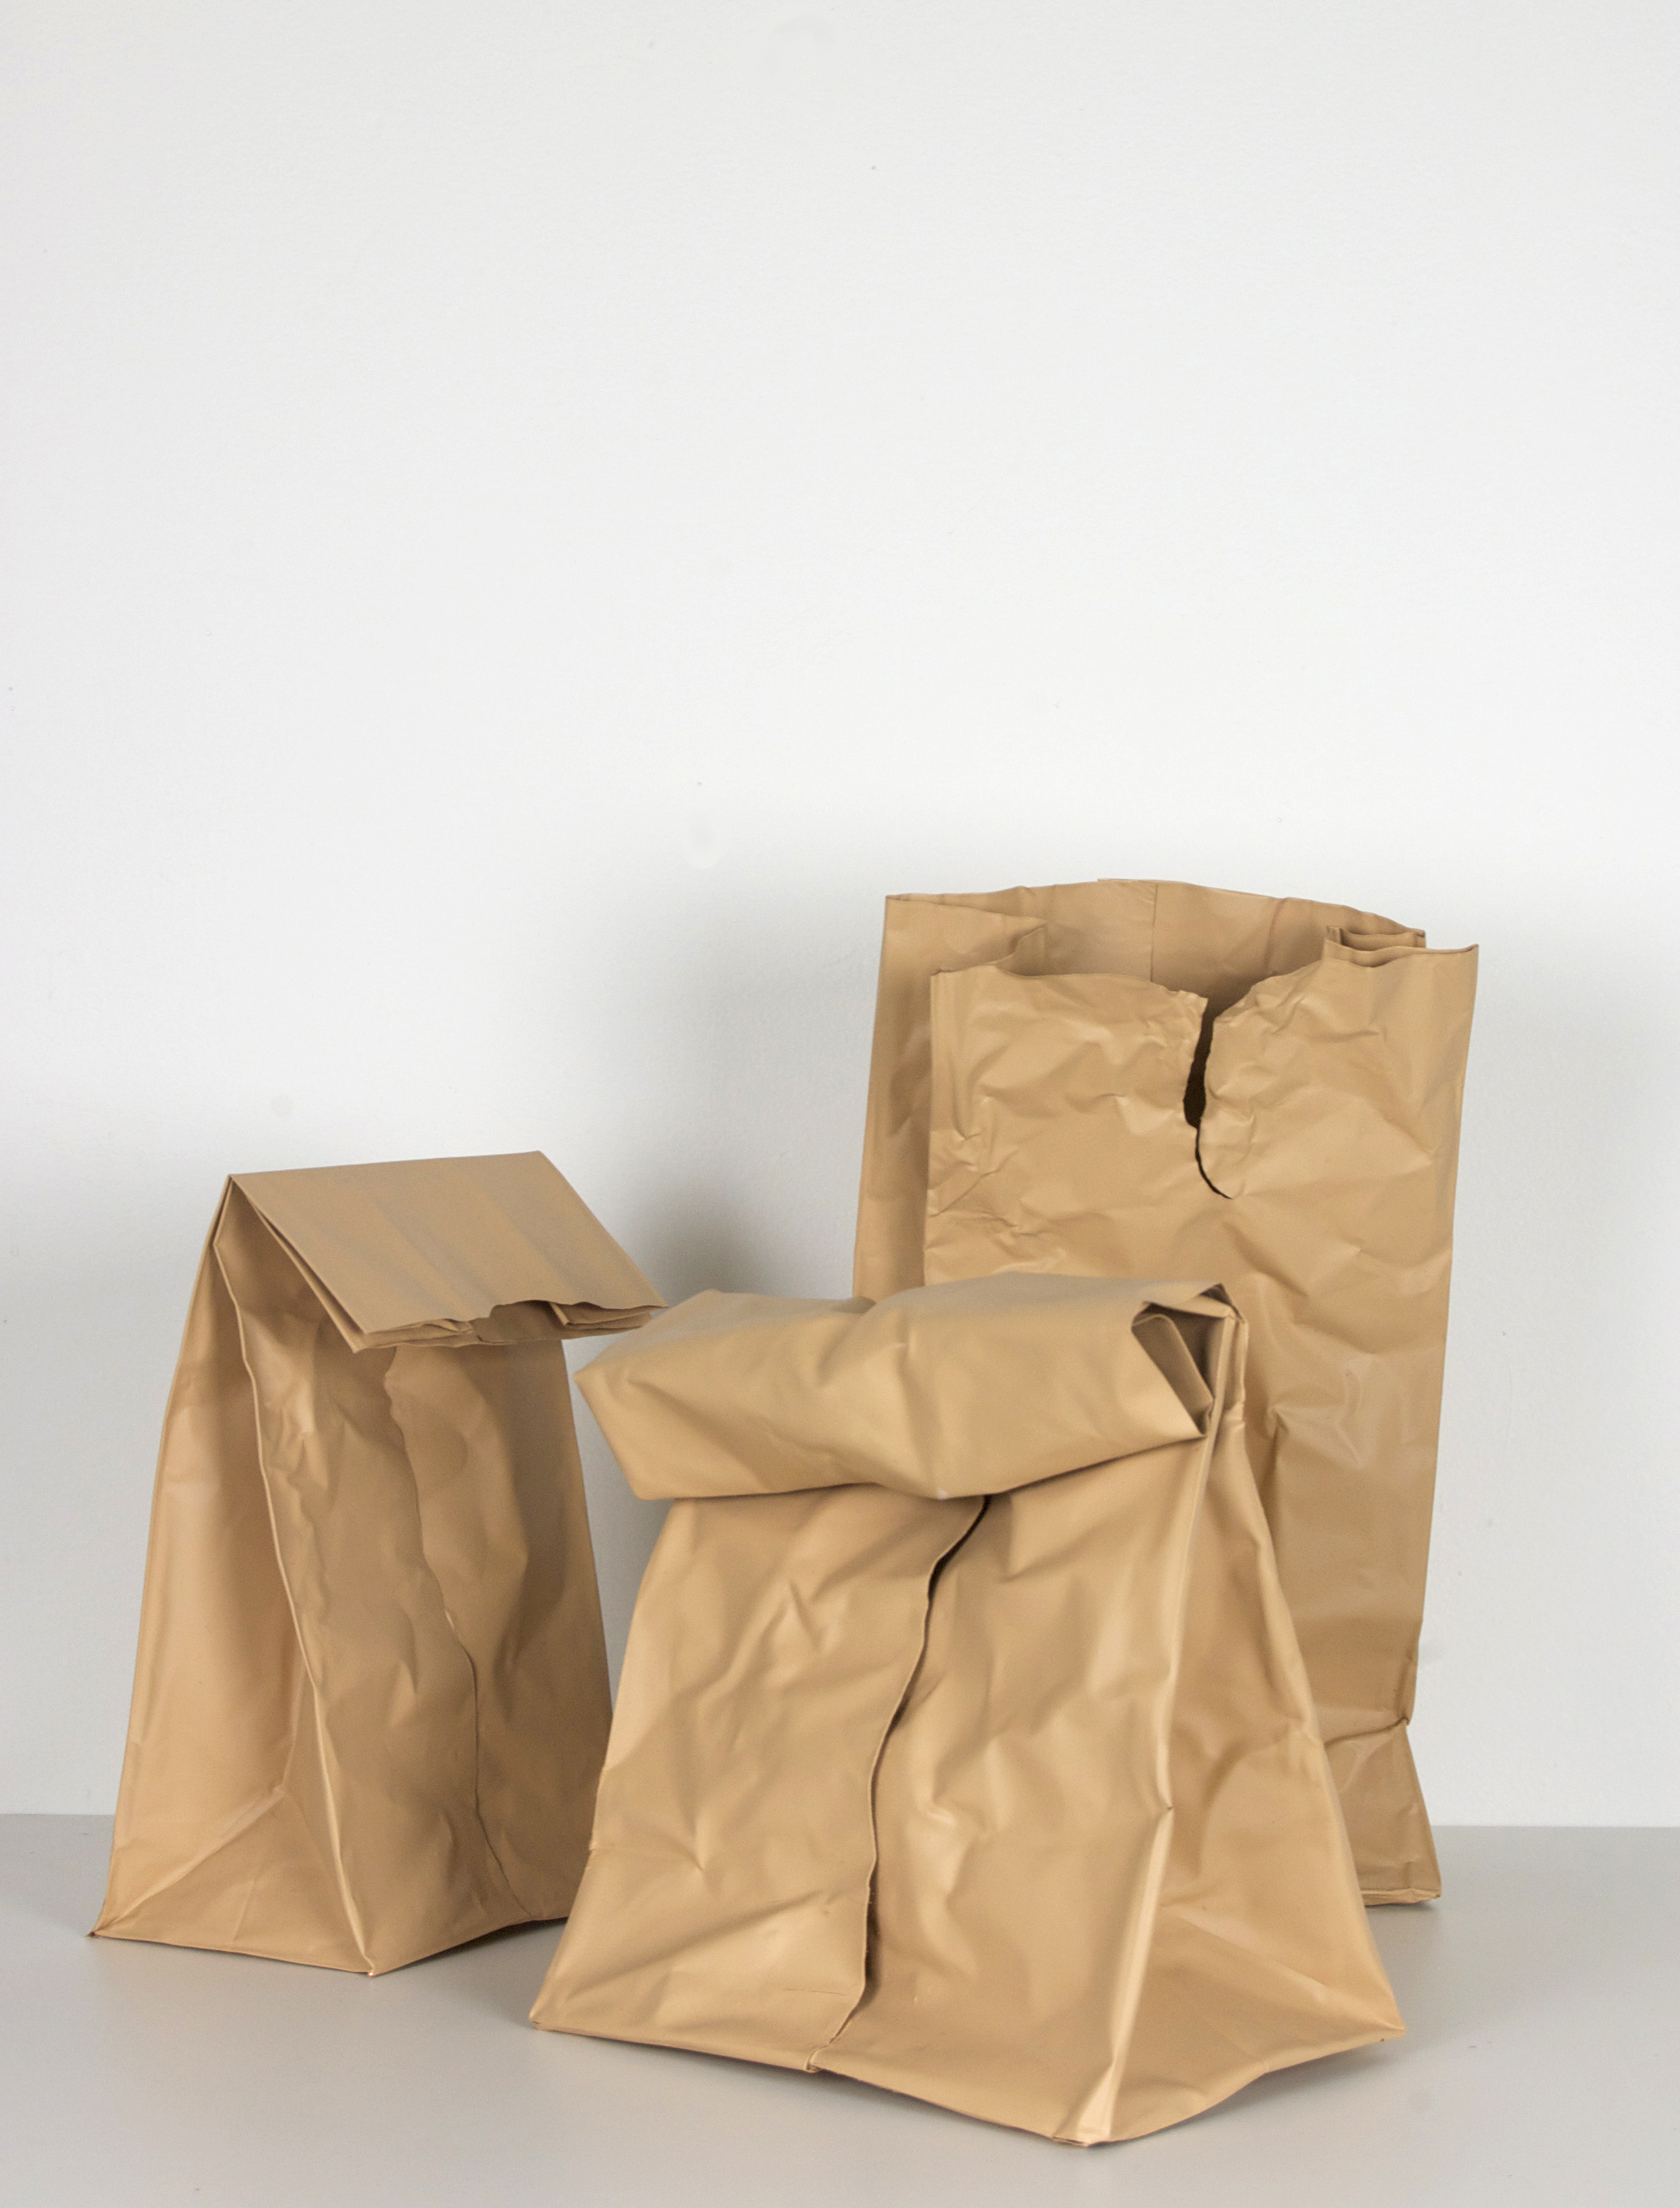 Beer Bag Series 2, 2014, Acrylic on copper (Select Installation)